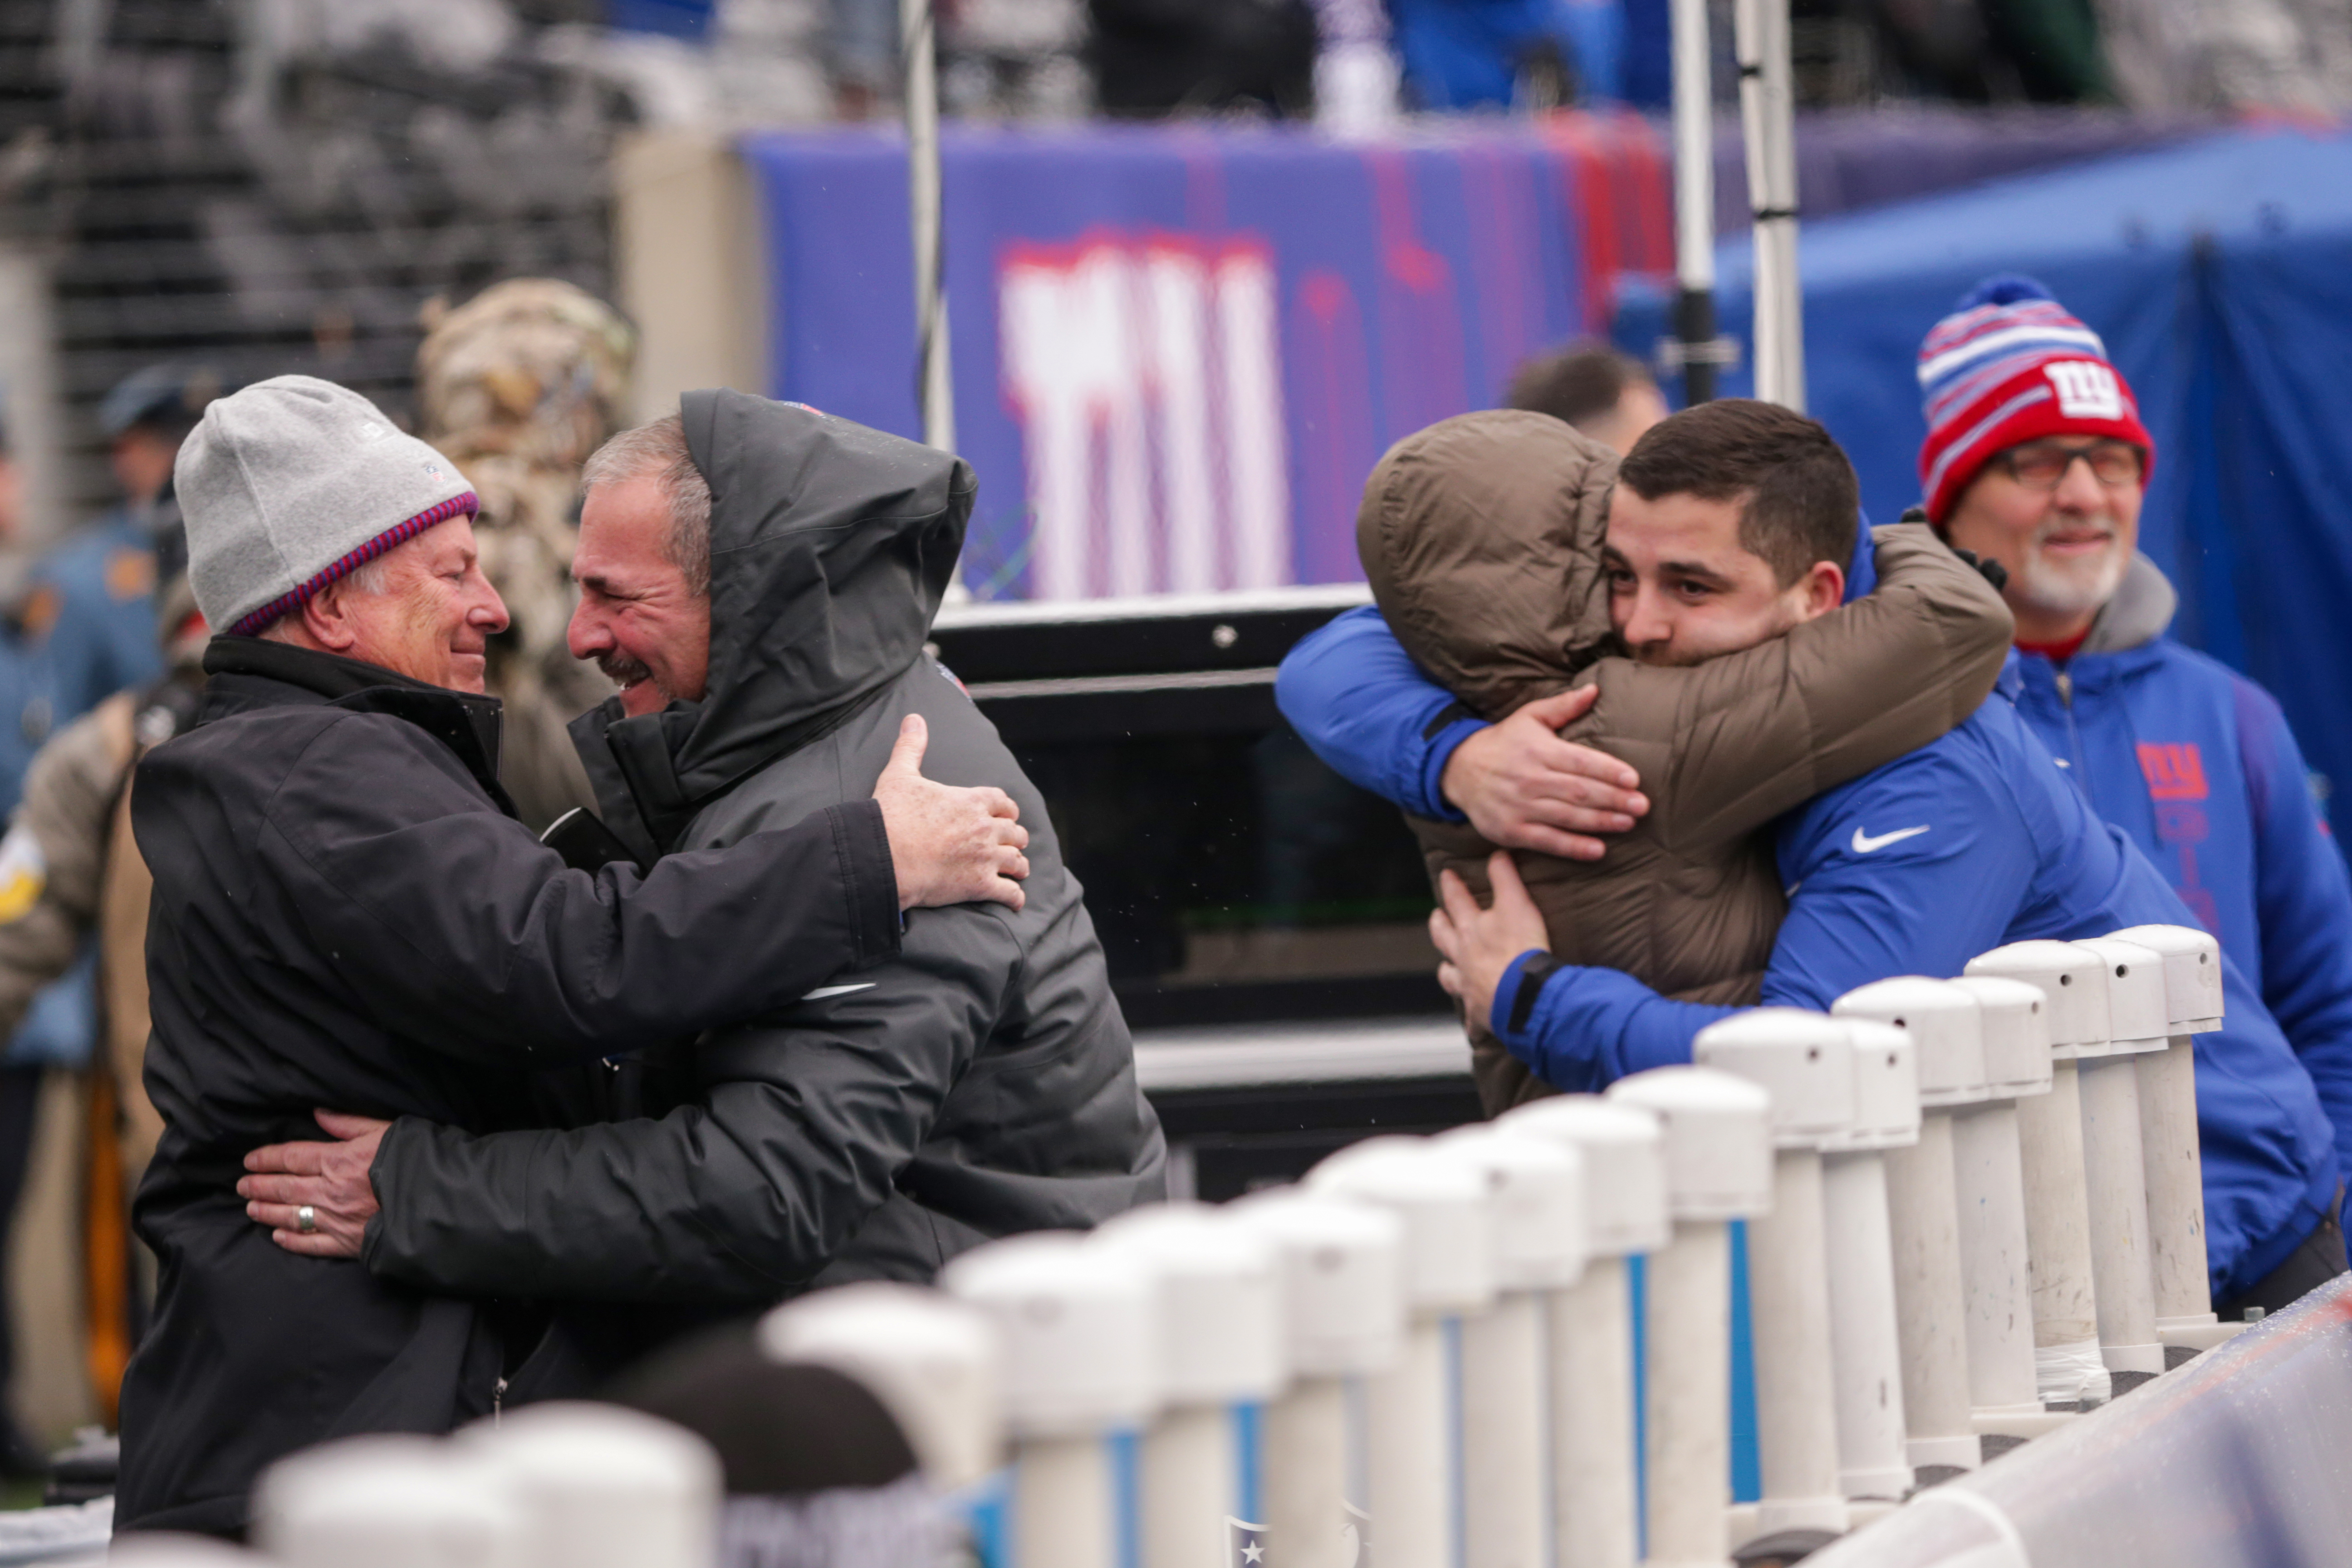 New York Giants general manager Dave Gettleman and his wife, Joanne, are embraced by friends and team personnel during pregame warmups as the Giants prepare to host the Washington Football Team on Sunday, Jan. 9, 2022 in East Rutherford, N.J.